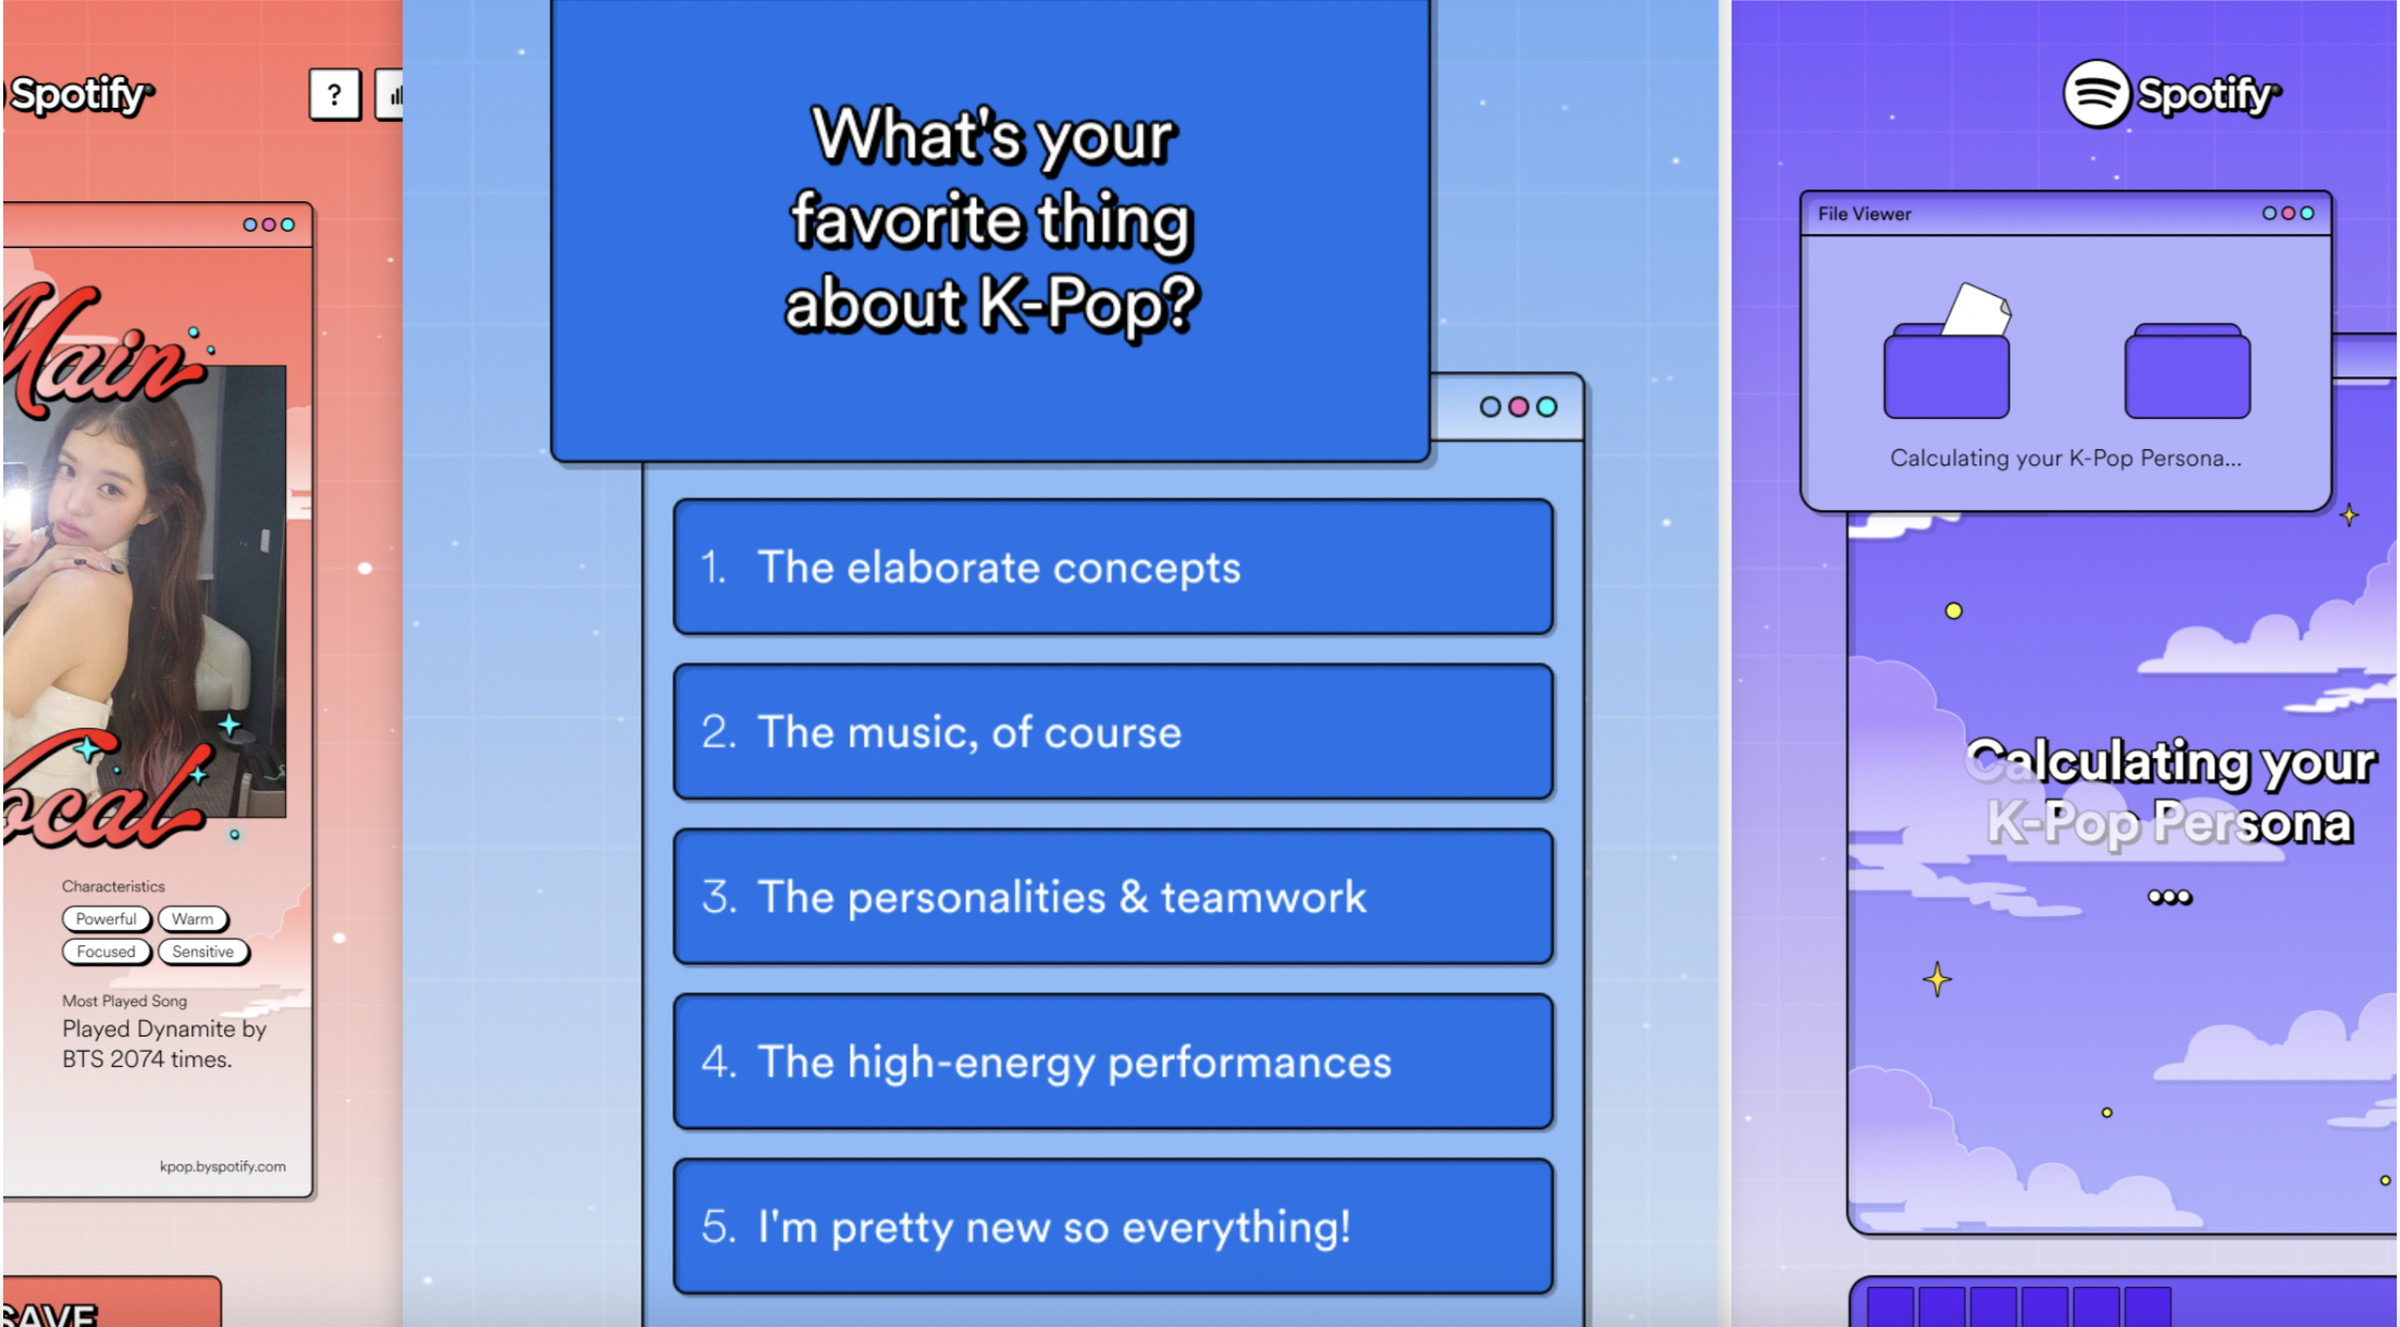 A screenshot of Spotify’s K-Pop Persona interactive quiz that displays the question, “What’s your favorite thing about K-Pop?”